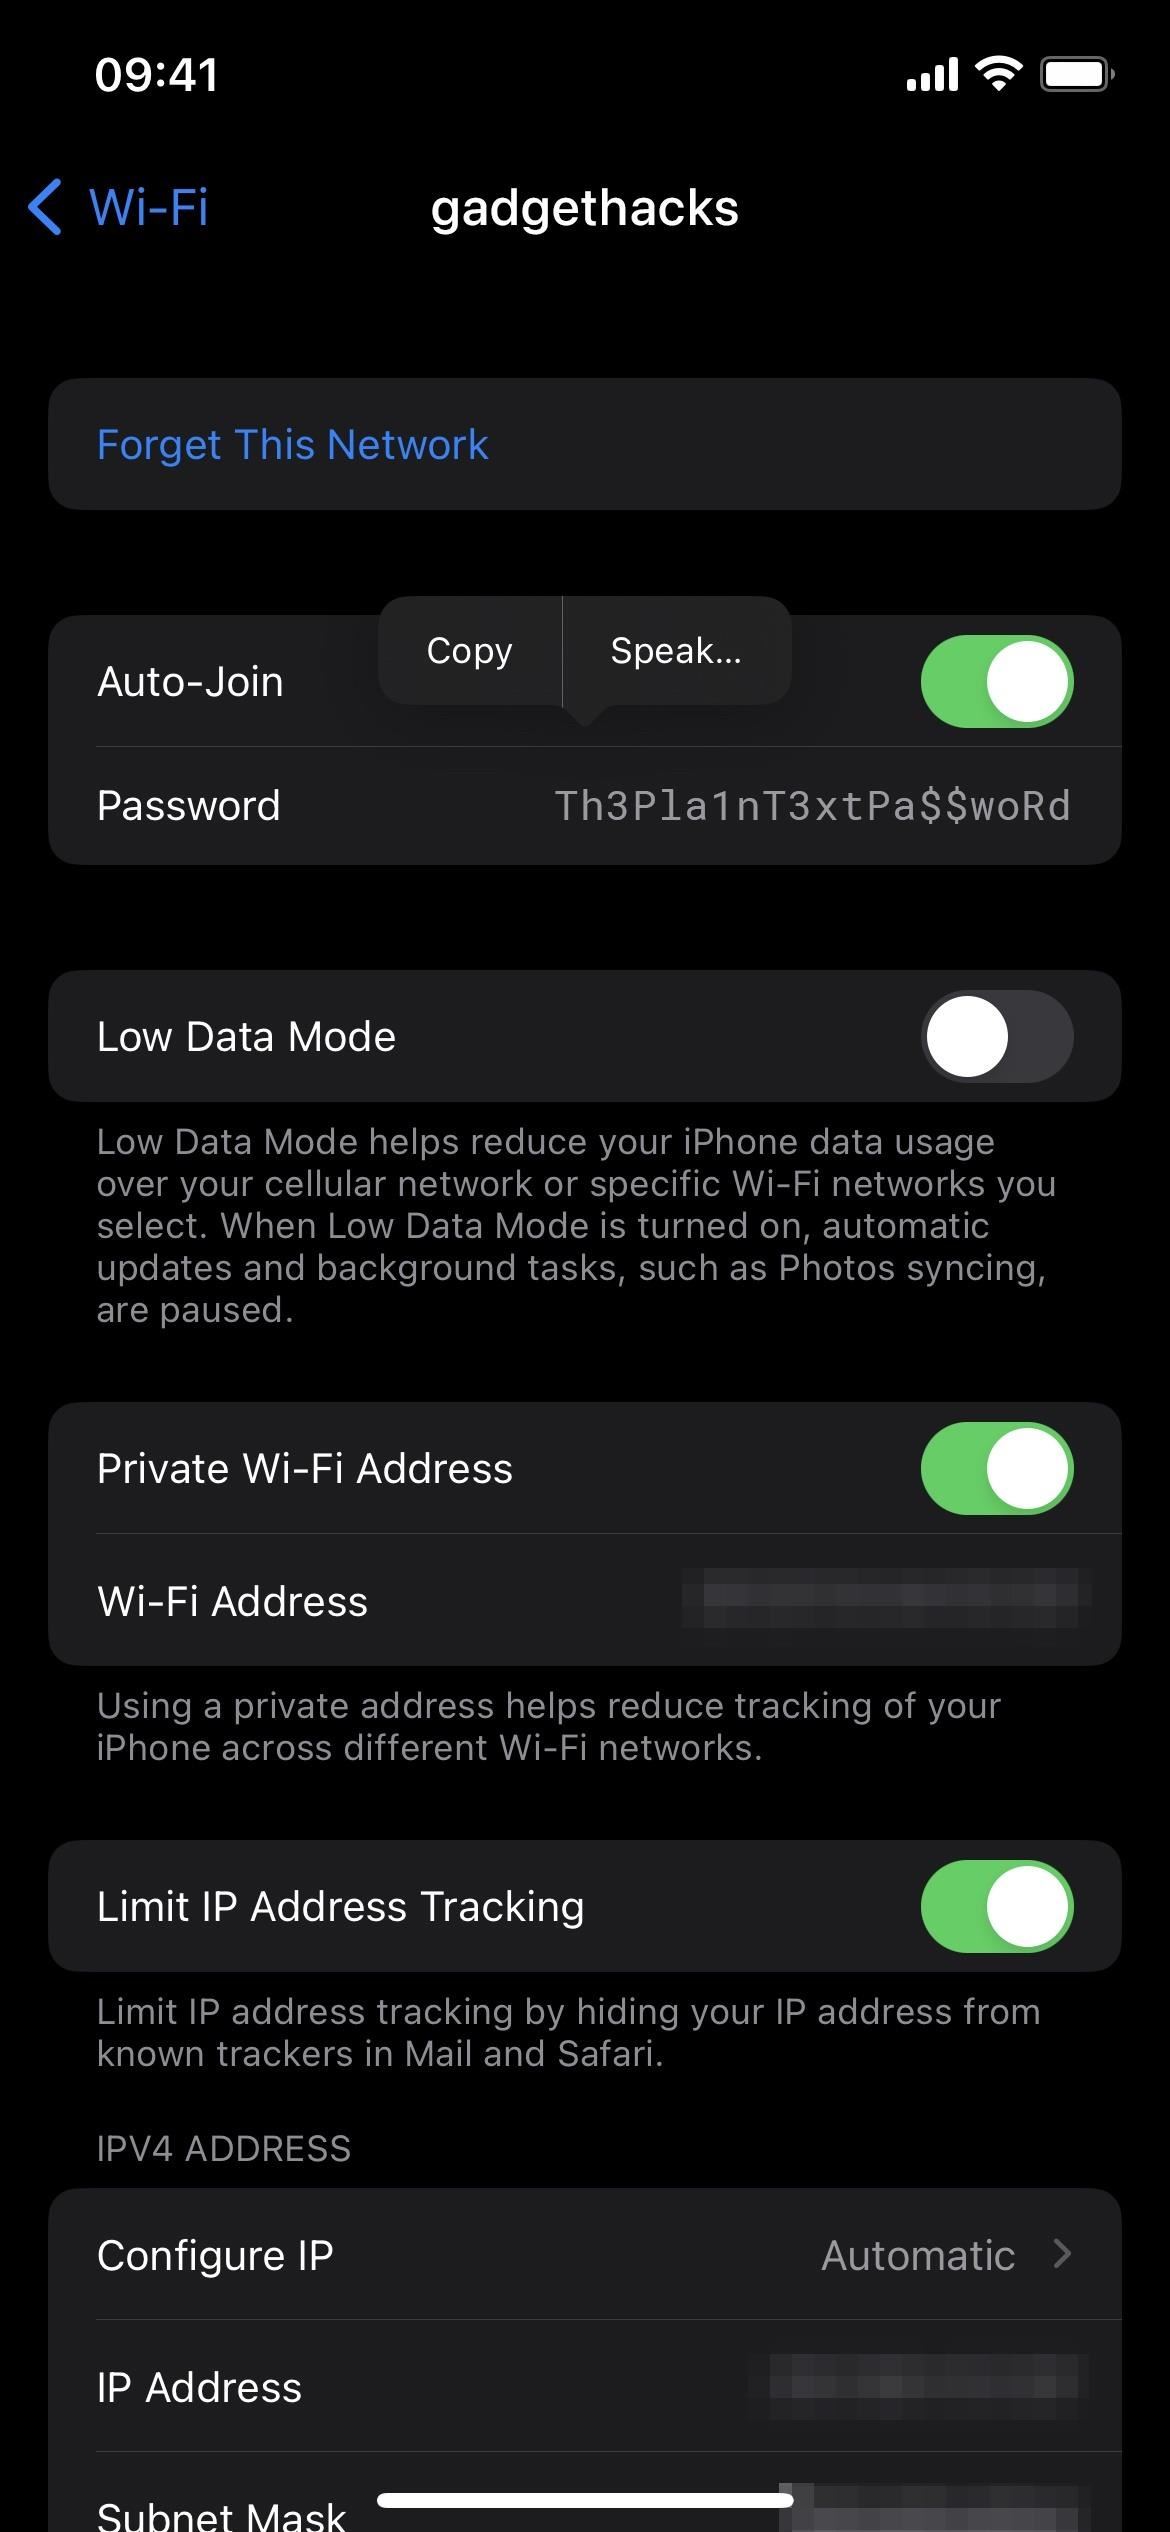 How to See Passwords for All the Wi-Fi Networks You've Connected Your iPhone To